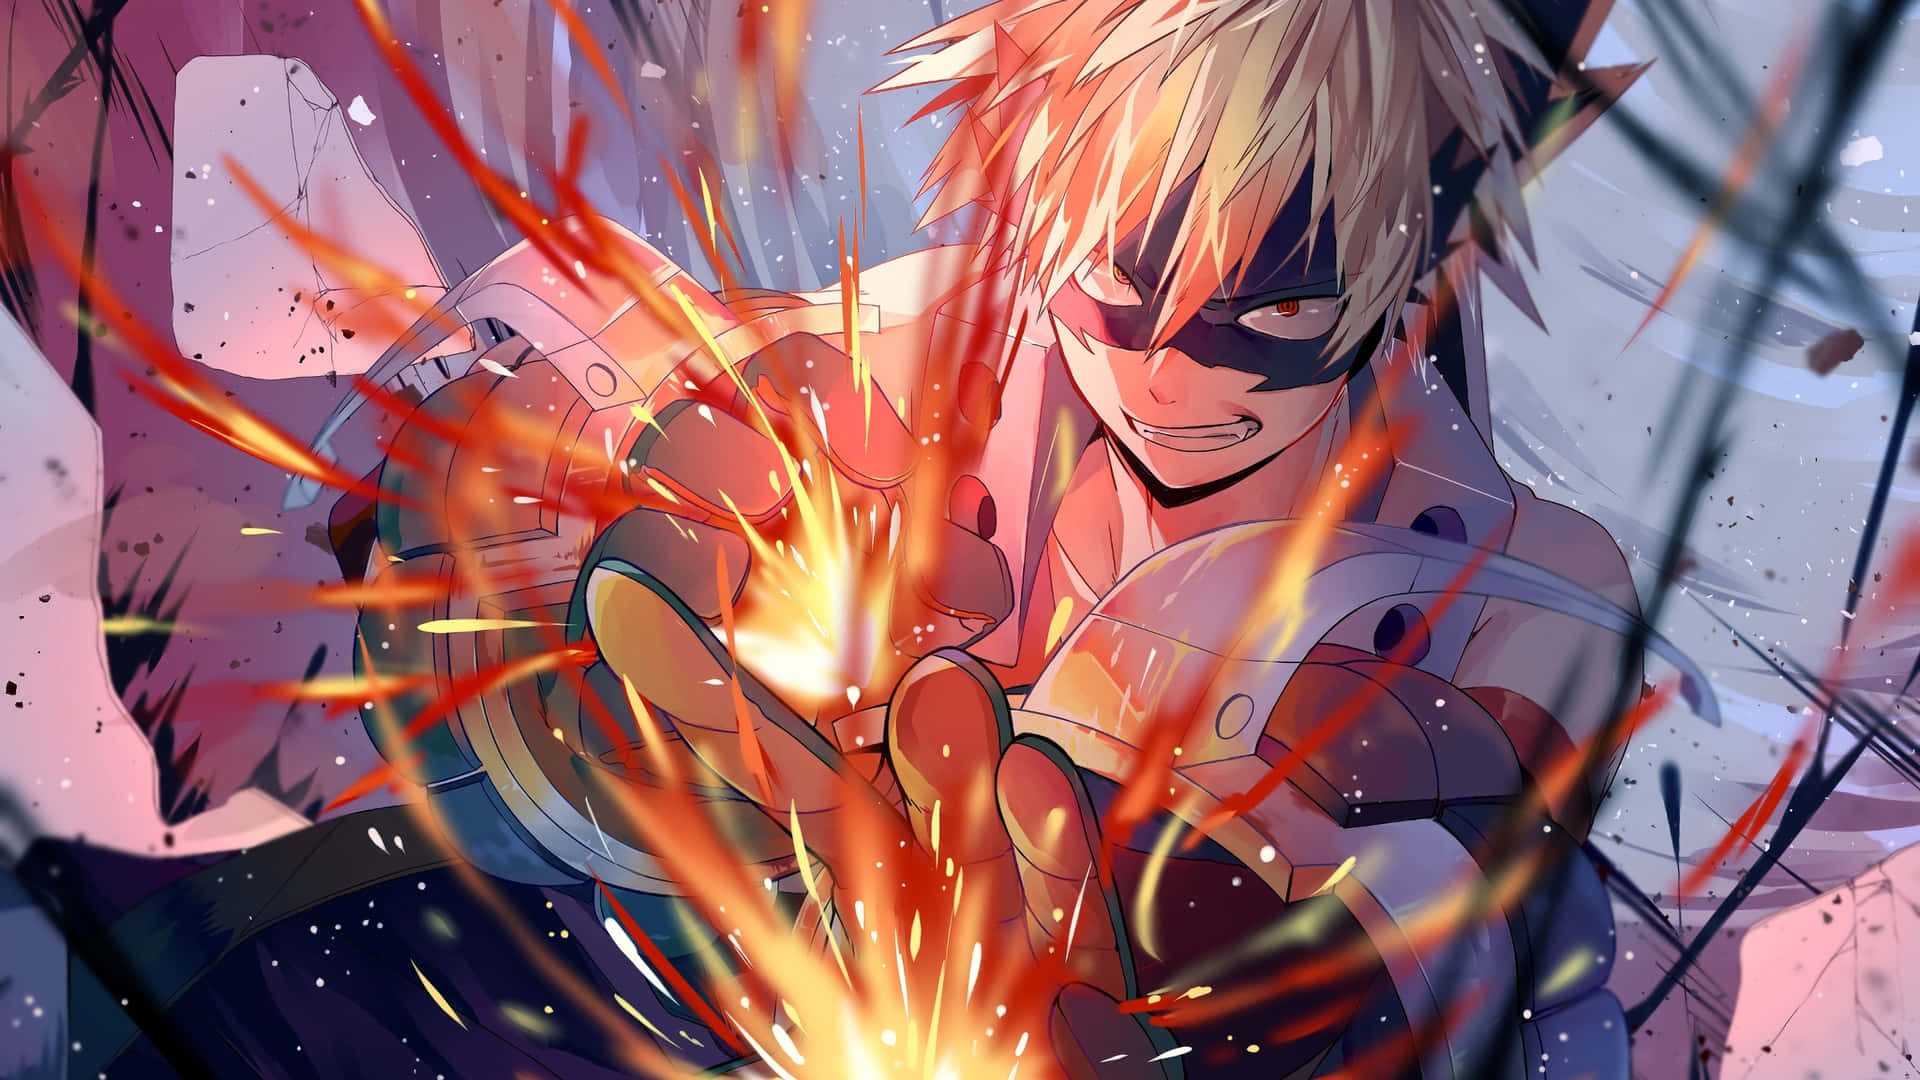 Bakugou stands determined against a fiery background Wallpaper